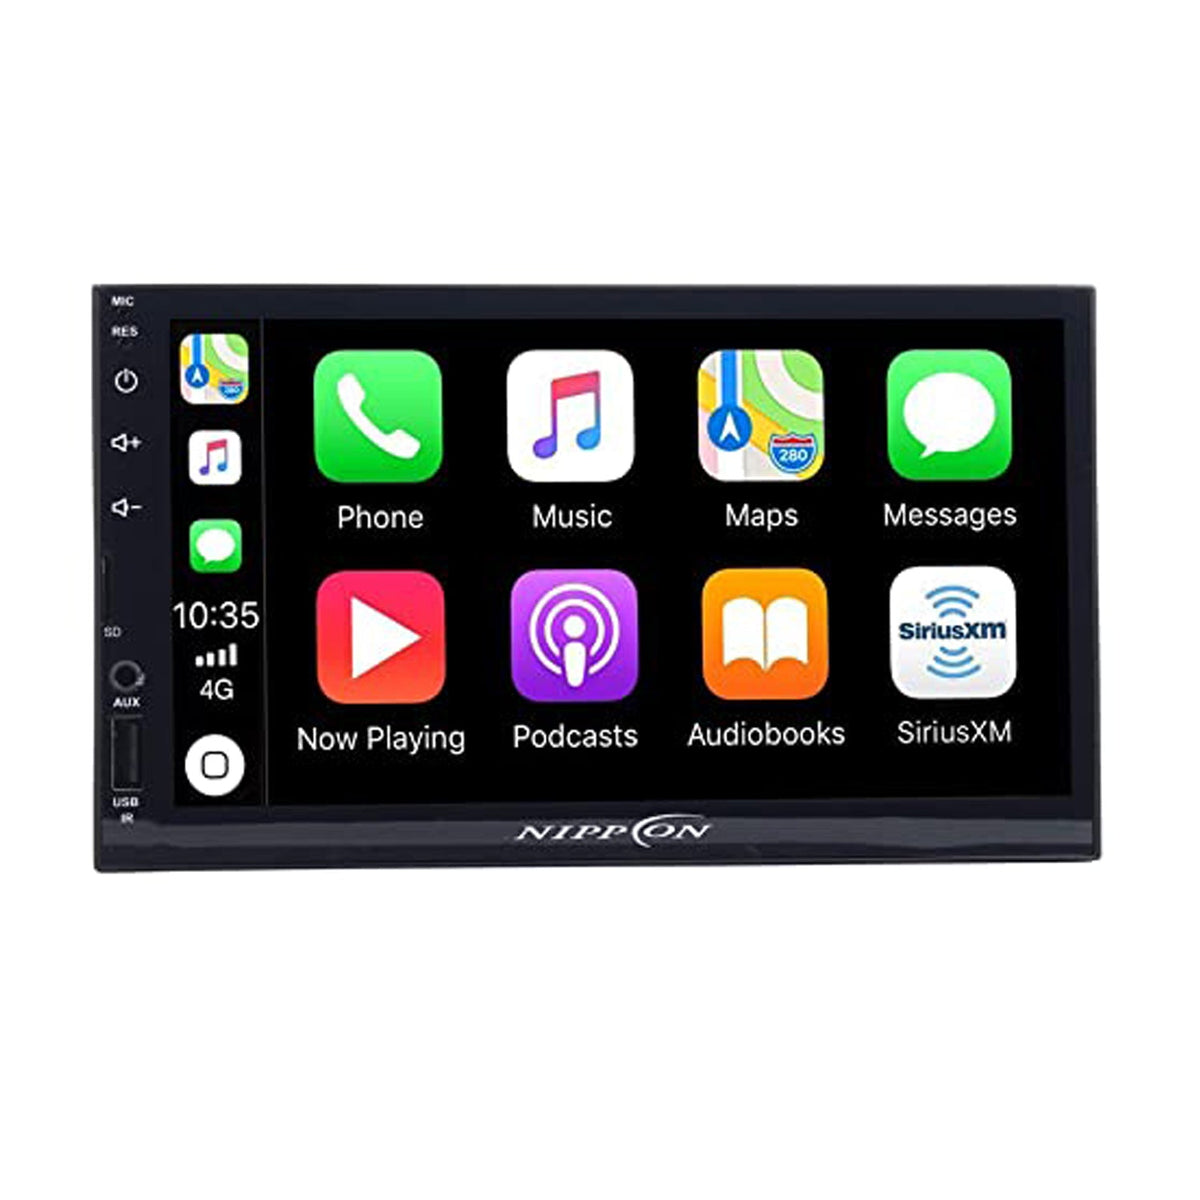 Nippon NDROID-9S Car Stereo, 9" Android Multimedia (Black)